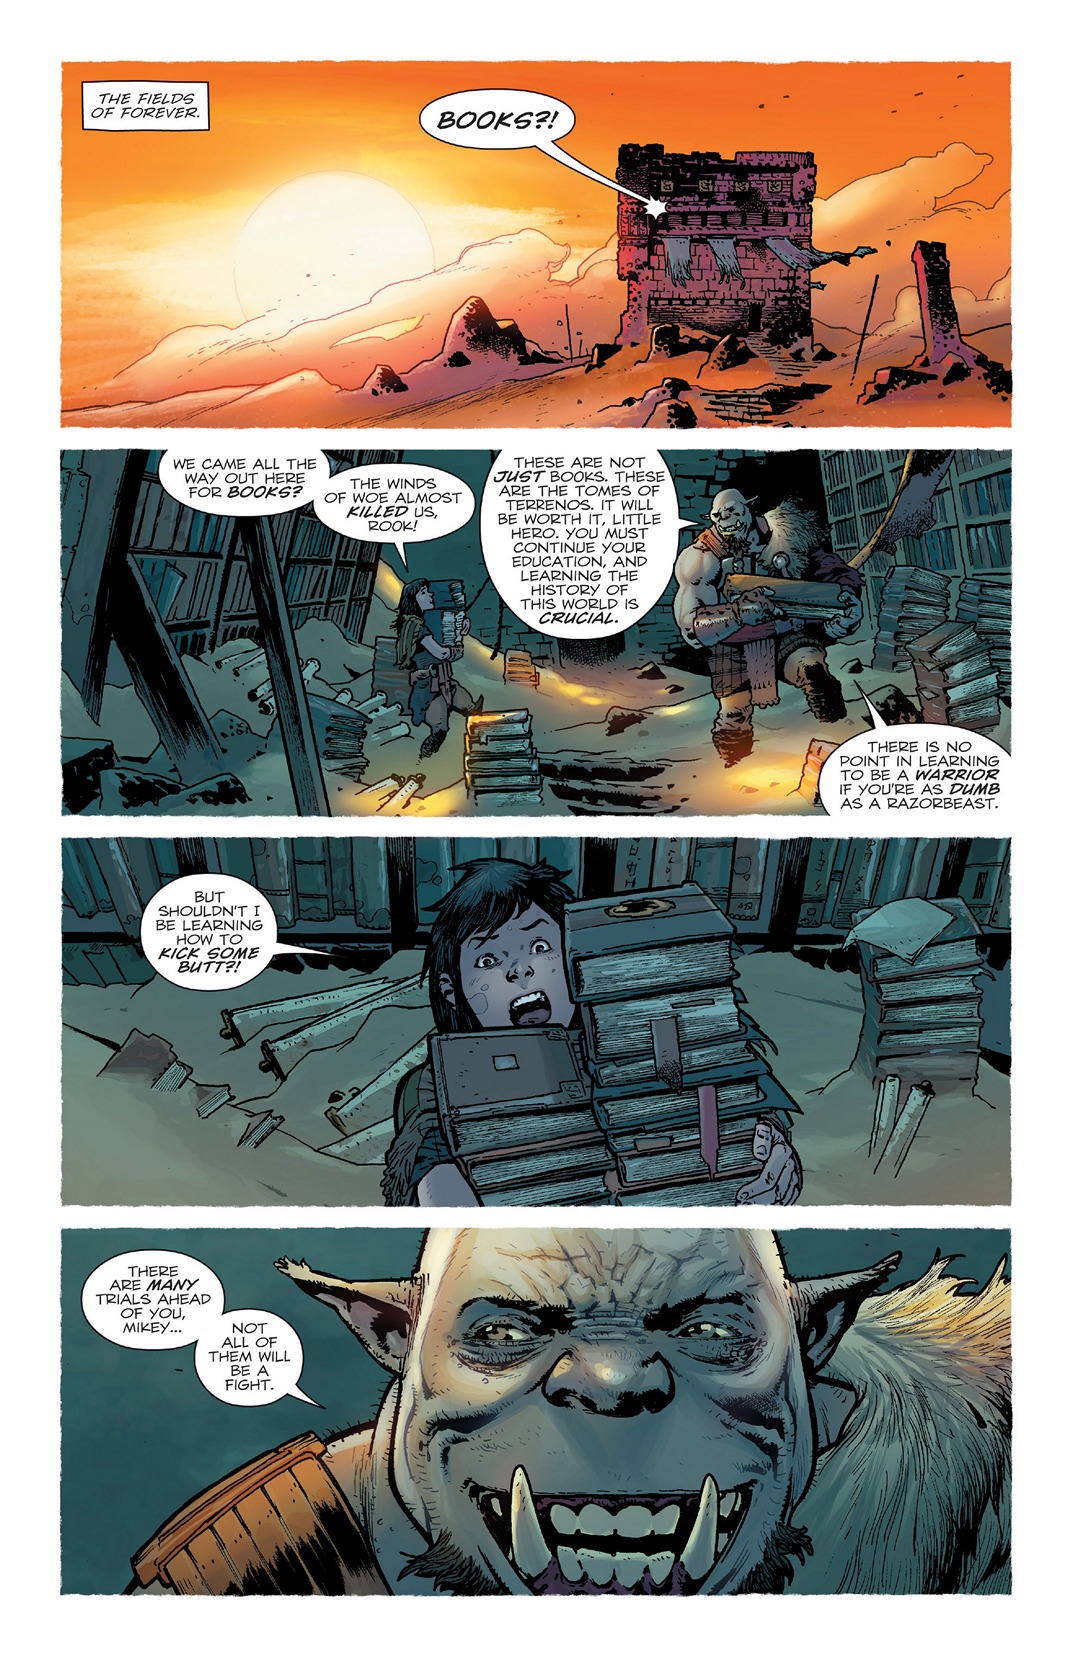 Birthright (2014-): Chapter 13 - Page 3